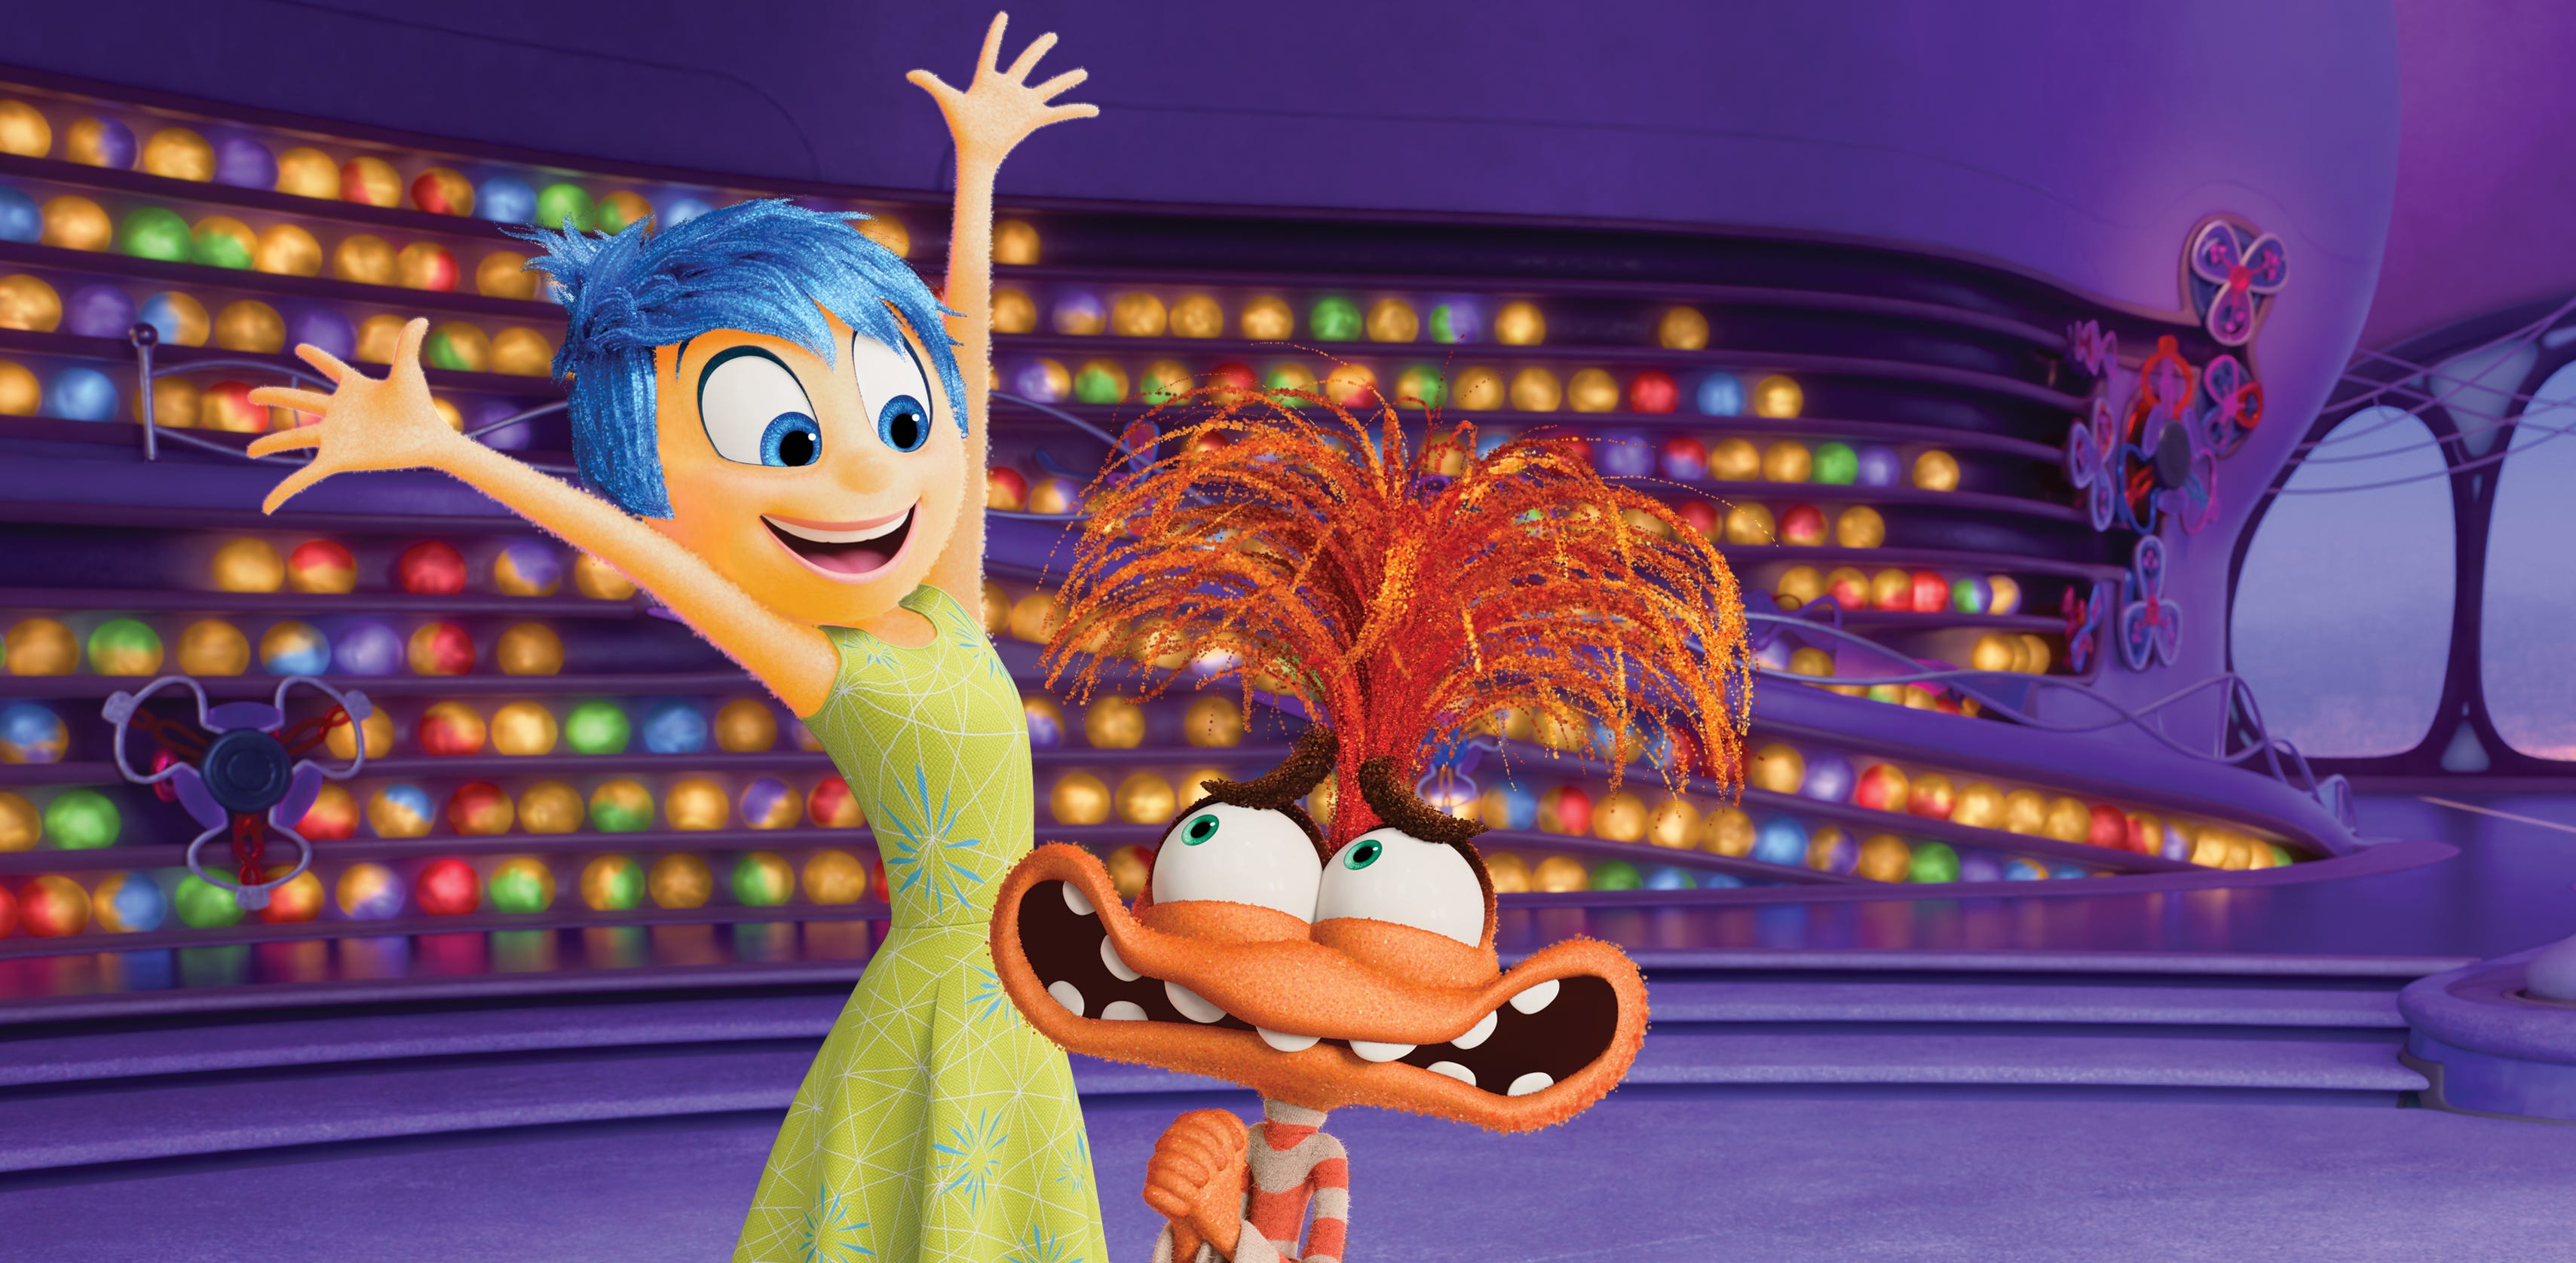 'Inside Out 2' review: The battle between Joy, Anxiety feels very real in profound sequel